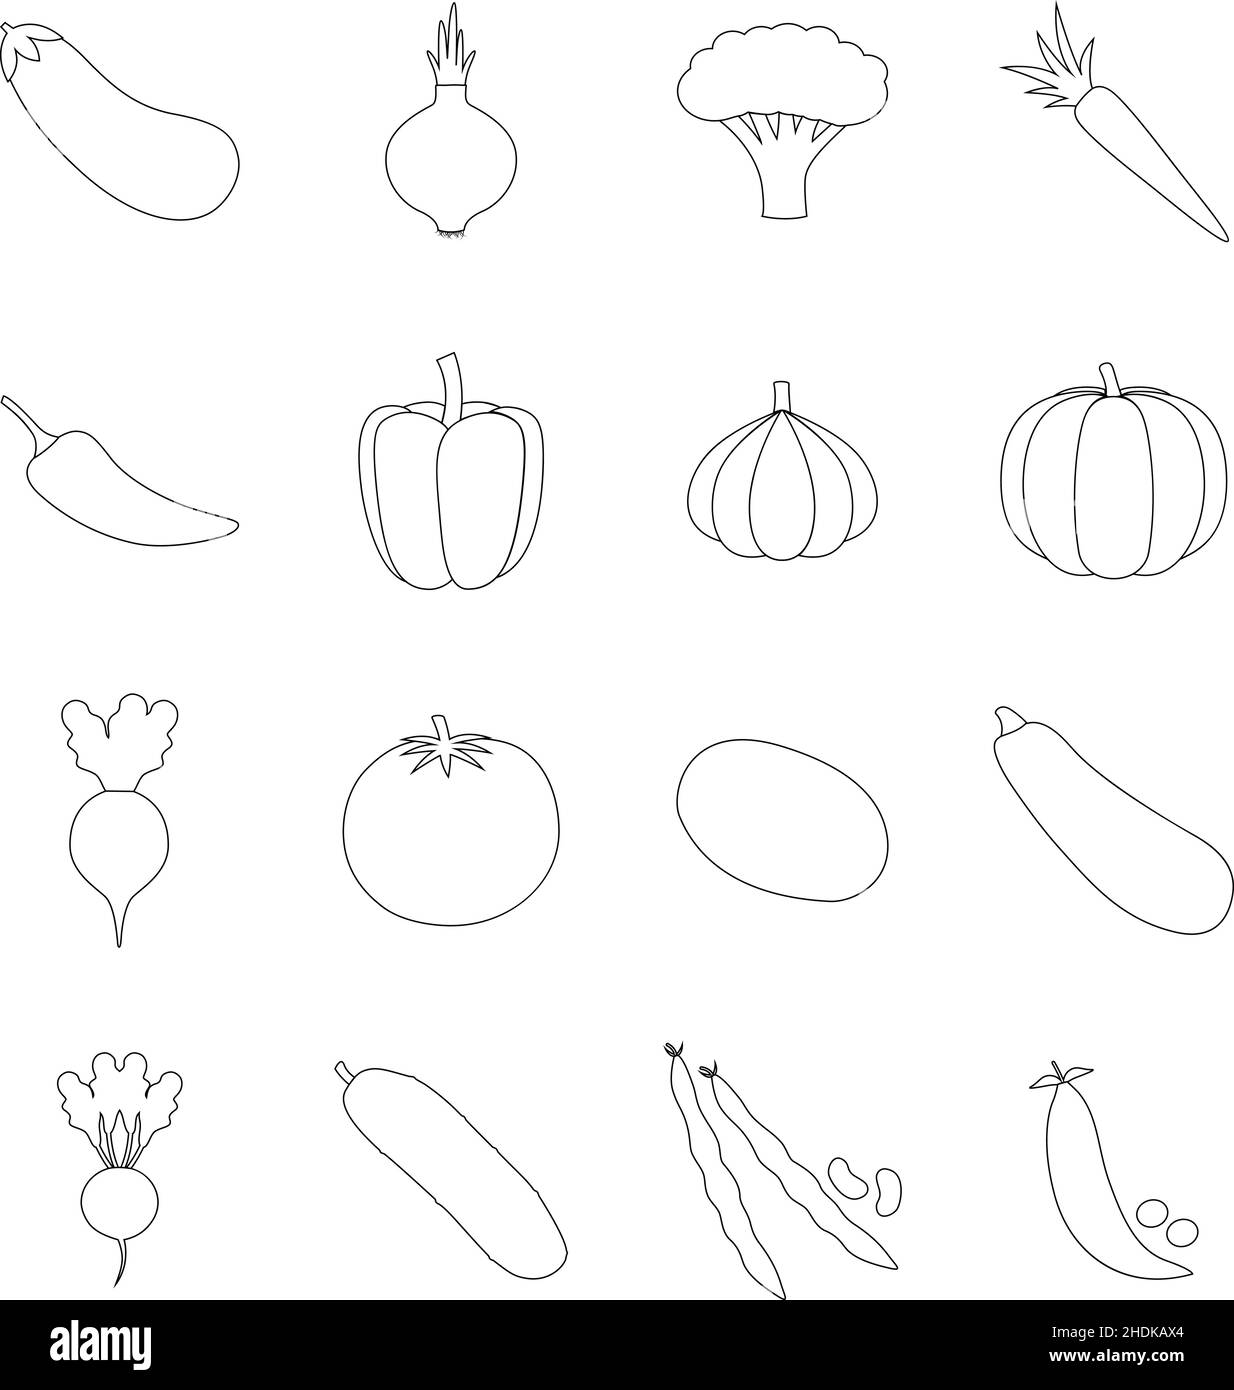 Set of vegetable icons, vector illustration Stock Vector